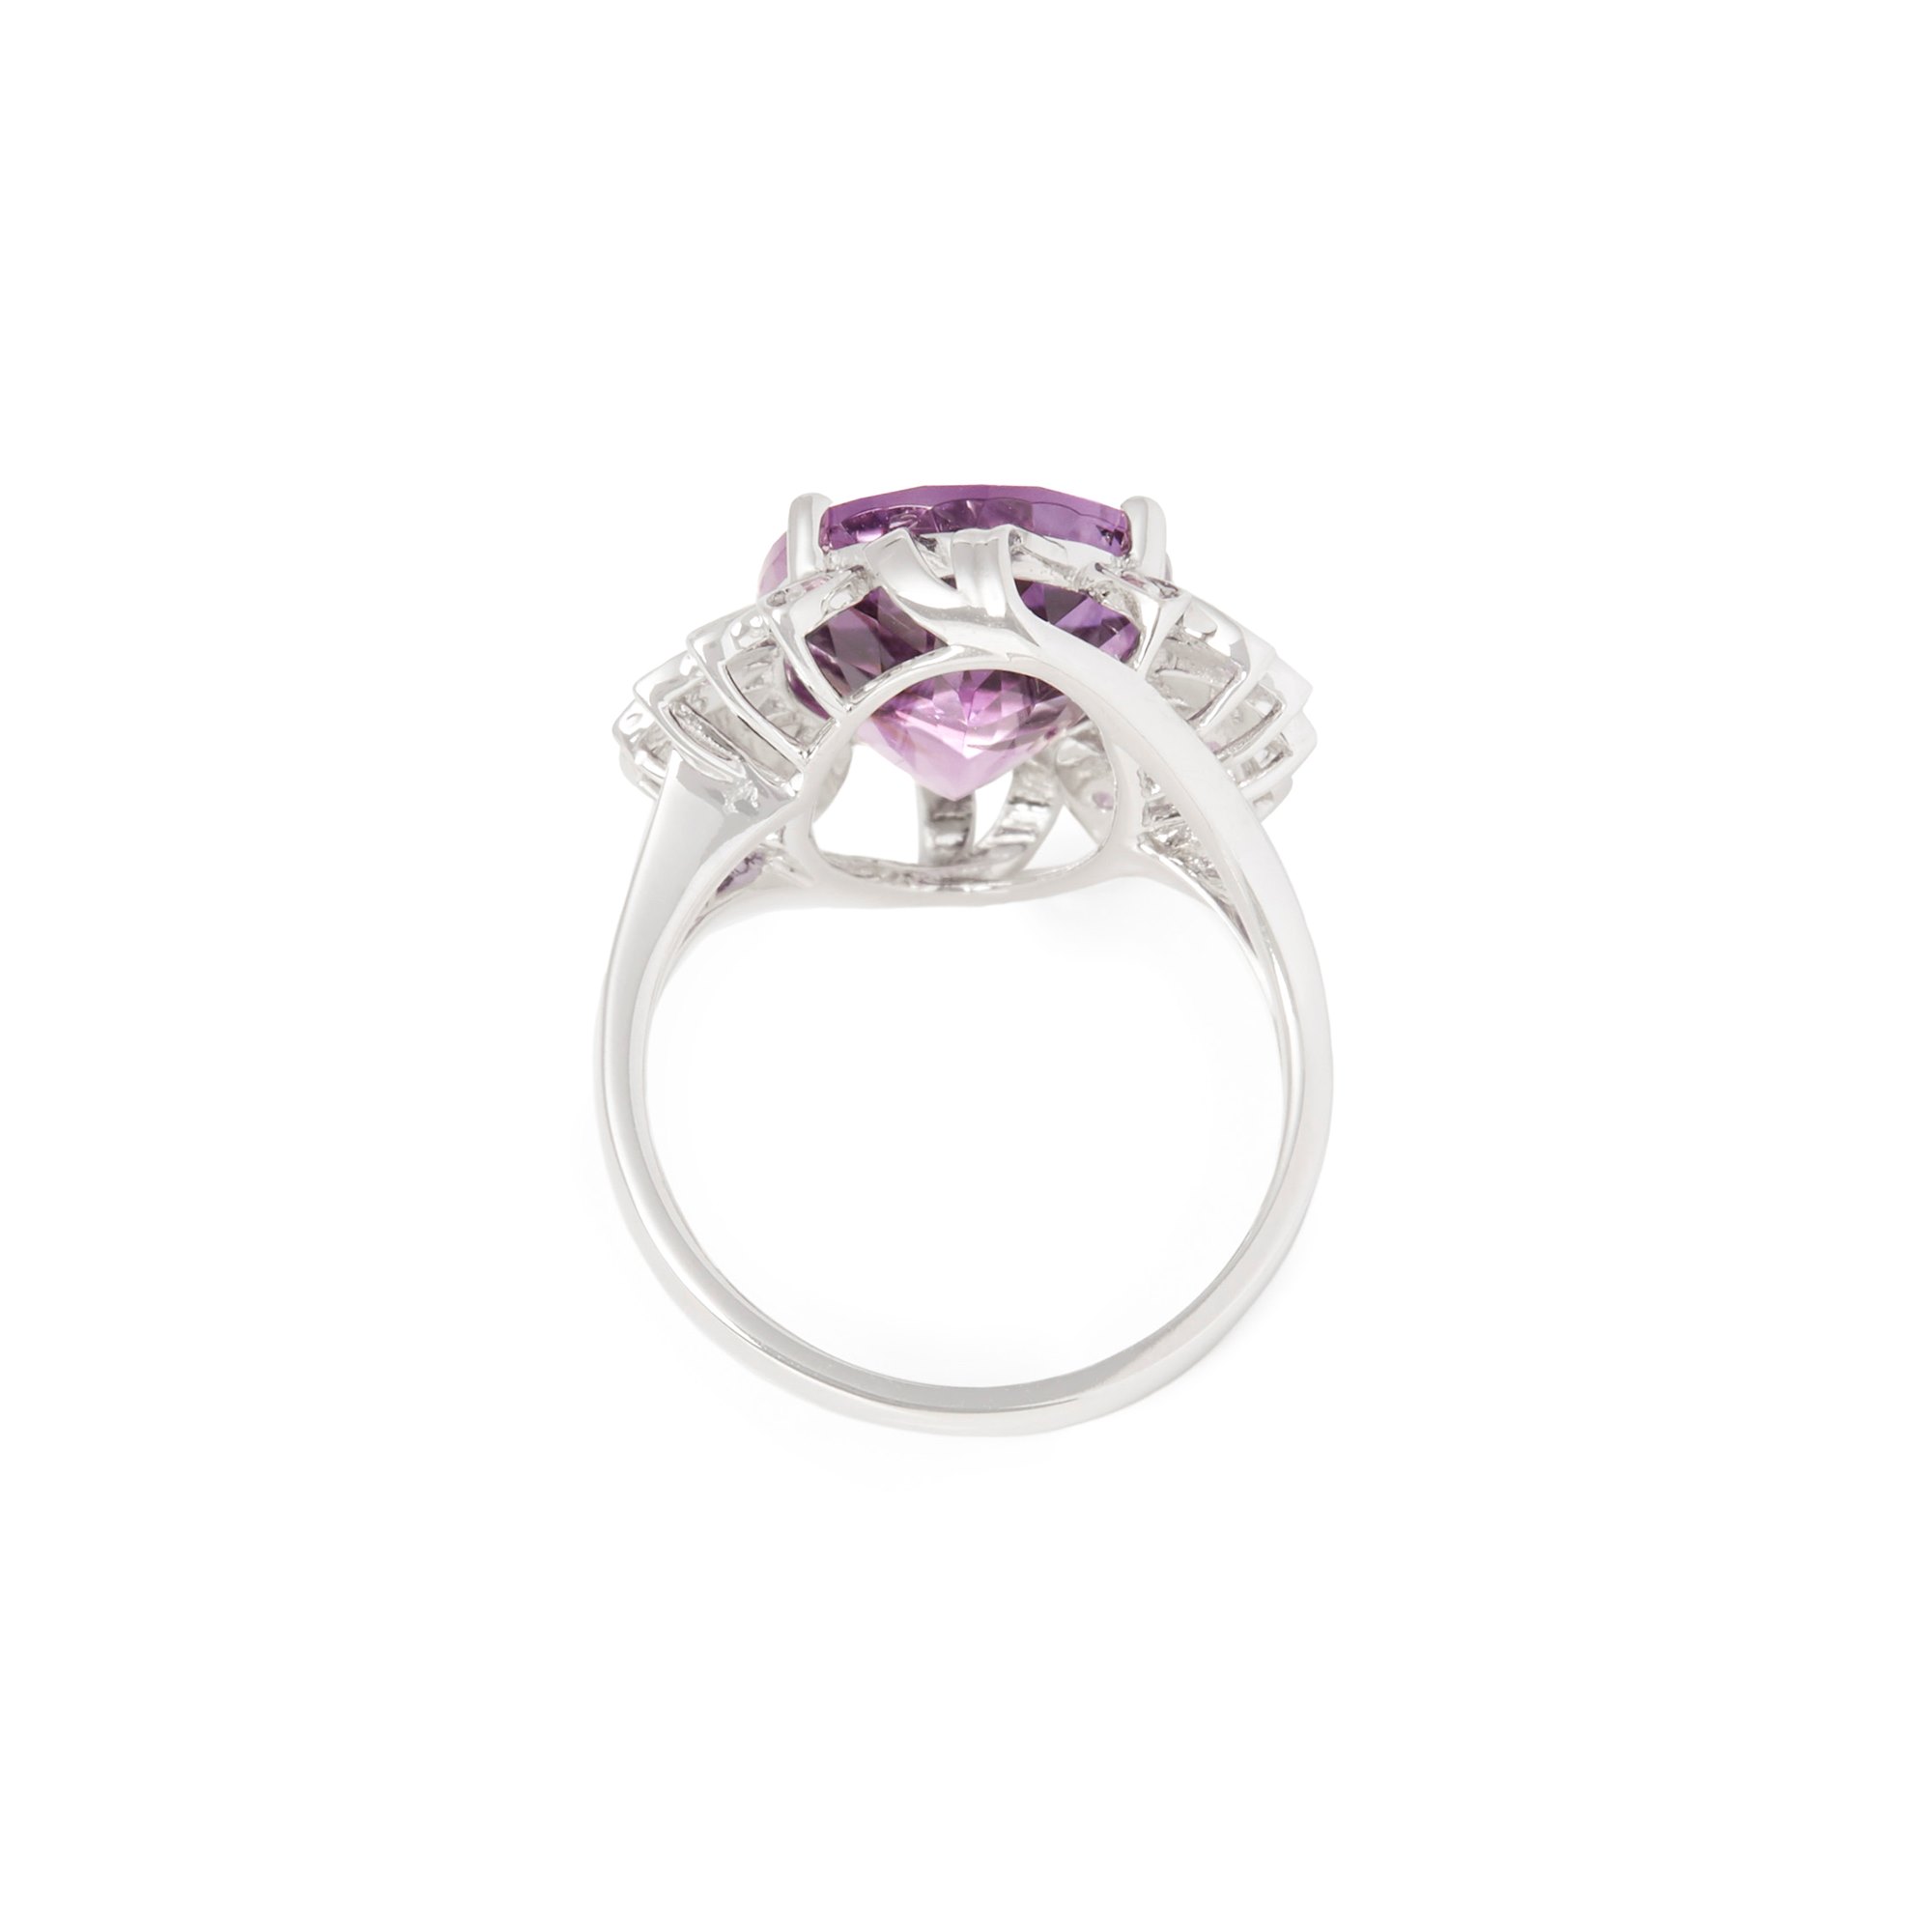 David Jerome Certified 7.07ct Untreated Russian Oval Cut Amethyst and Diamond 18ct gold Ring